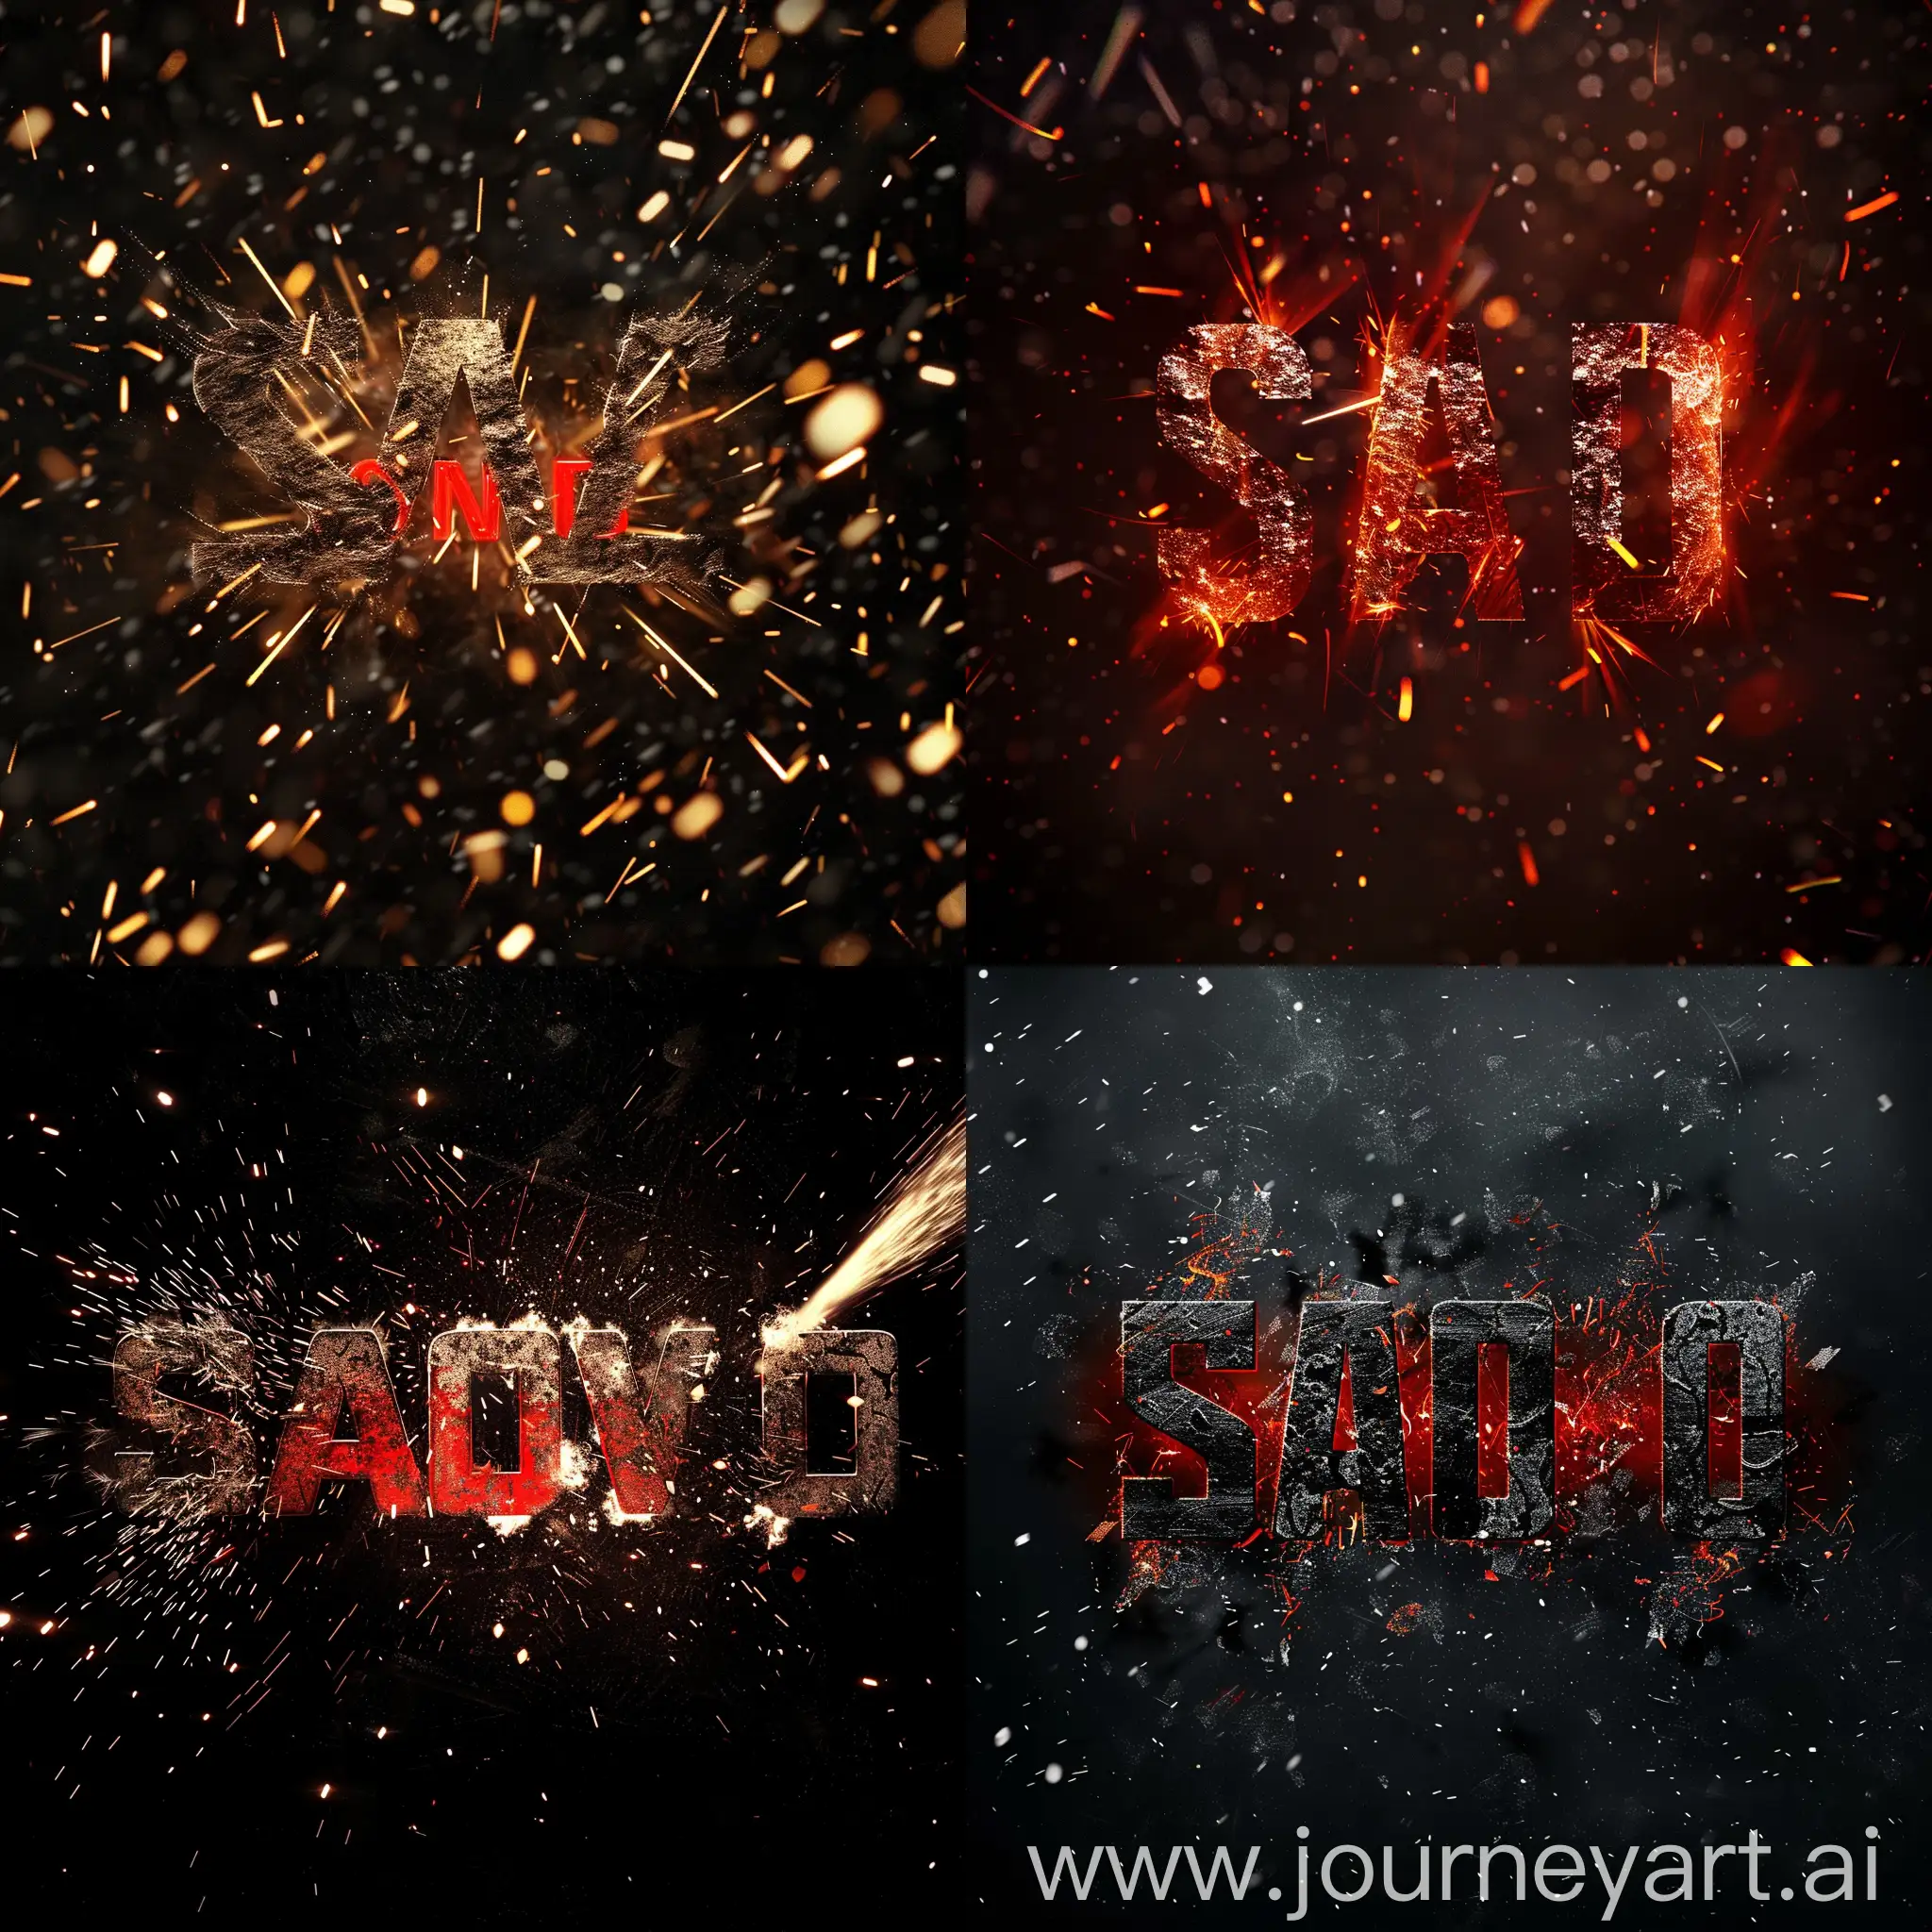 Futuristic-Squad-Typography-Artwork-with-Red-W-Accent-on-Black-Metallic-Background